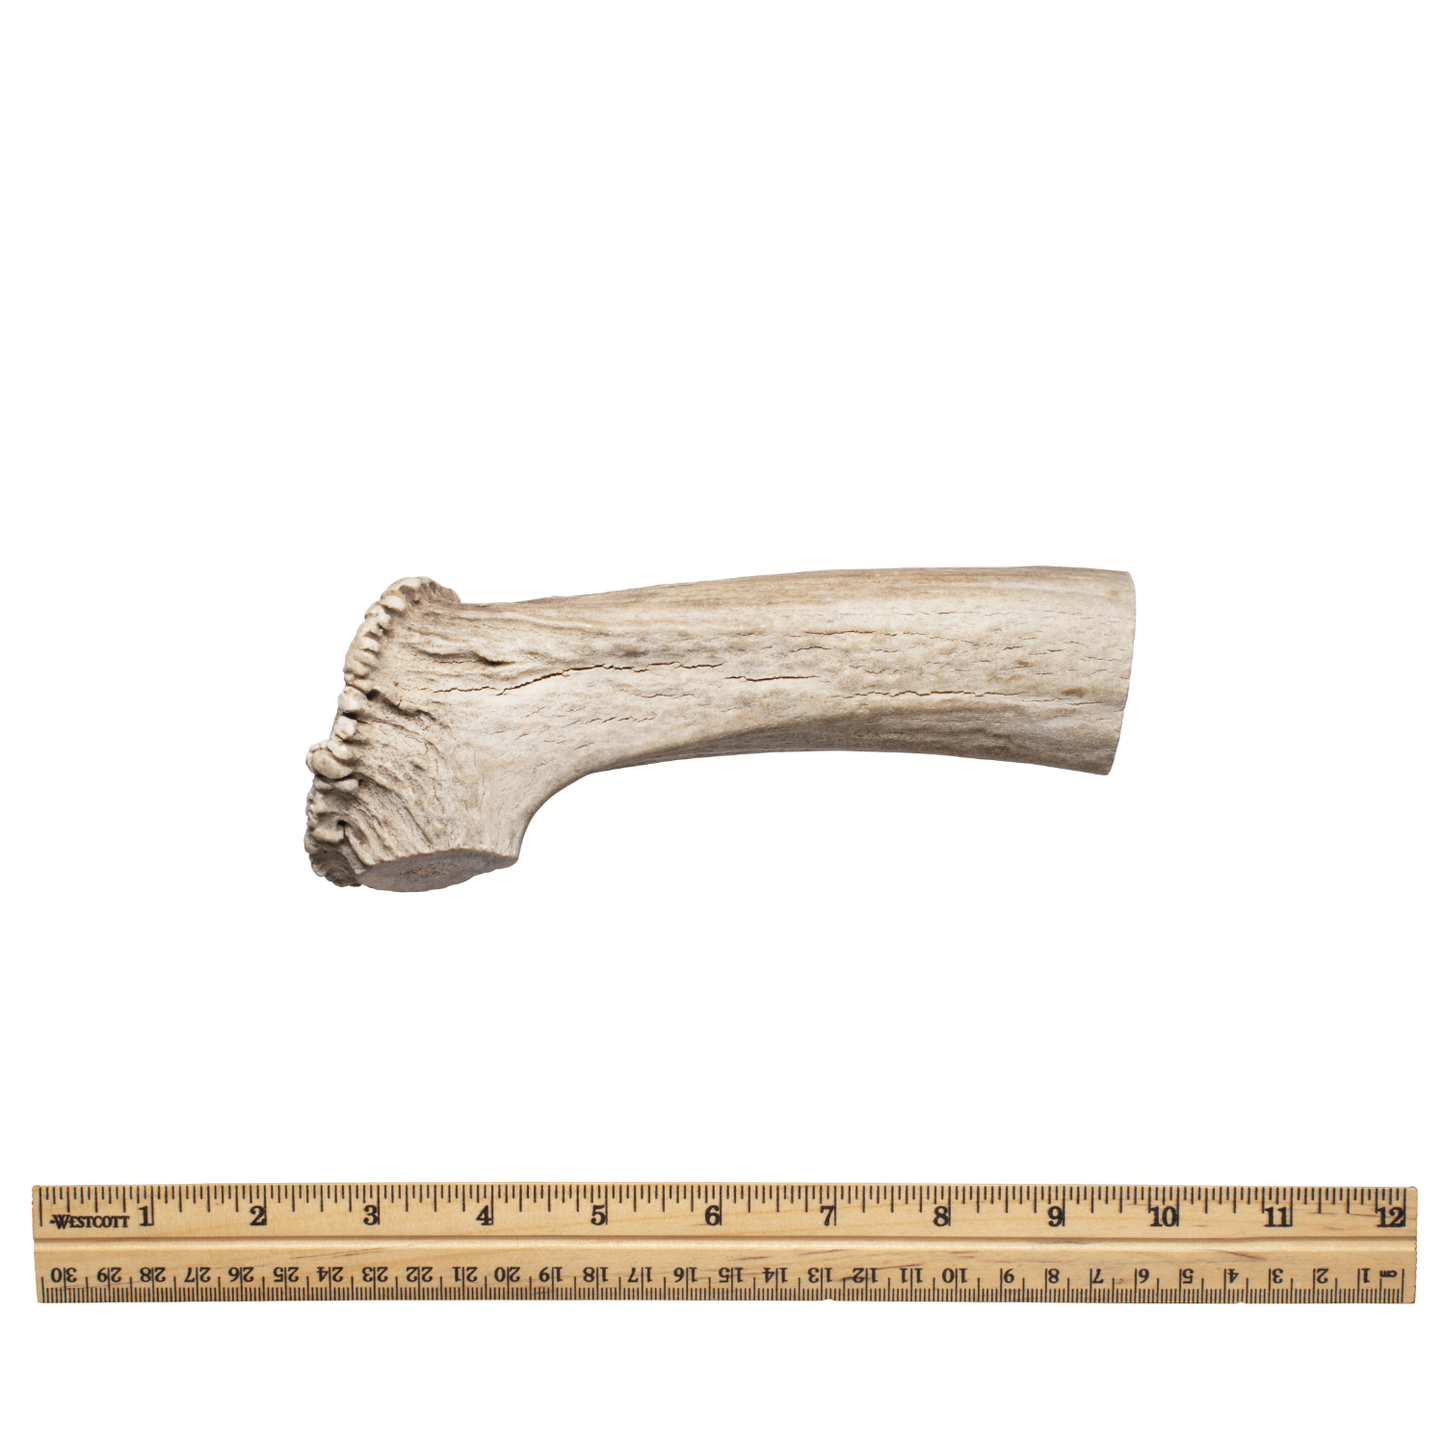 Whole antler xl without tag